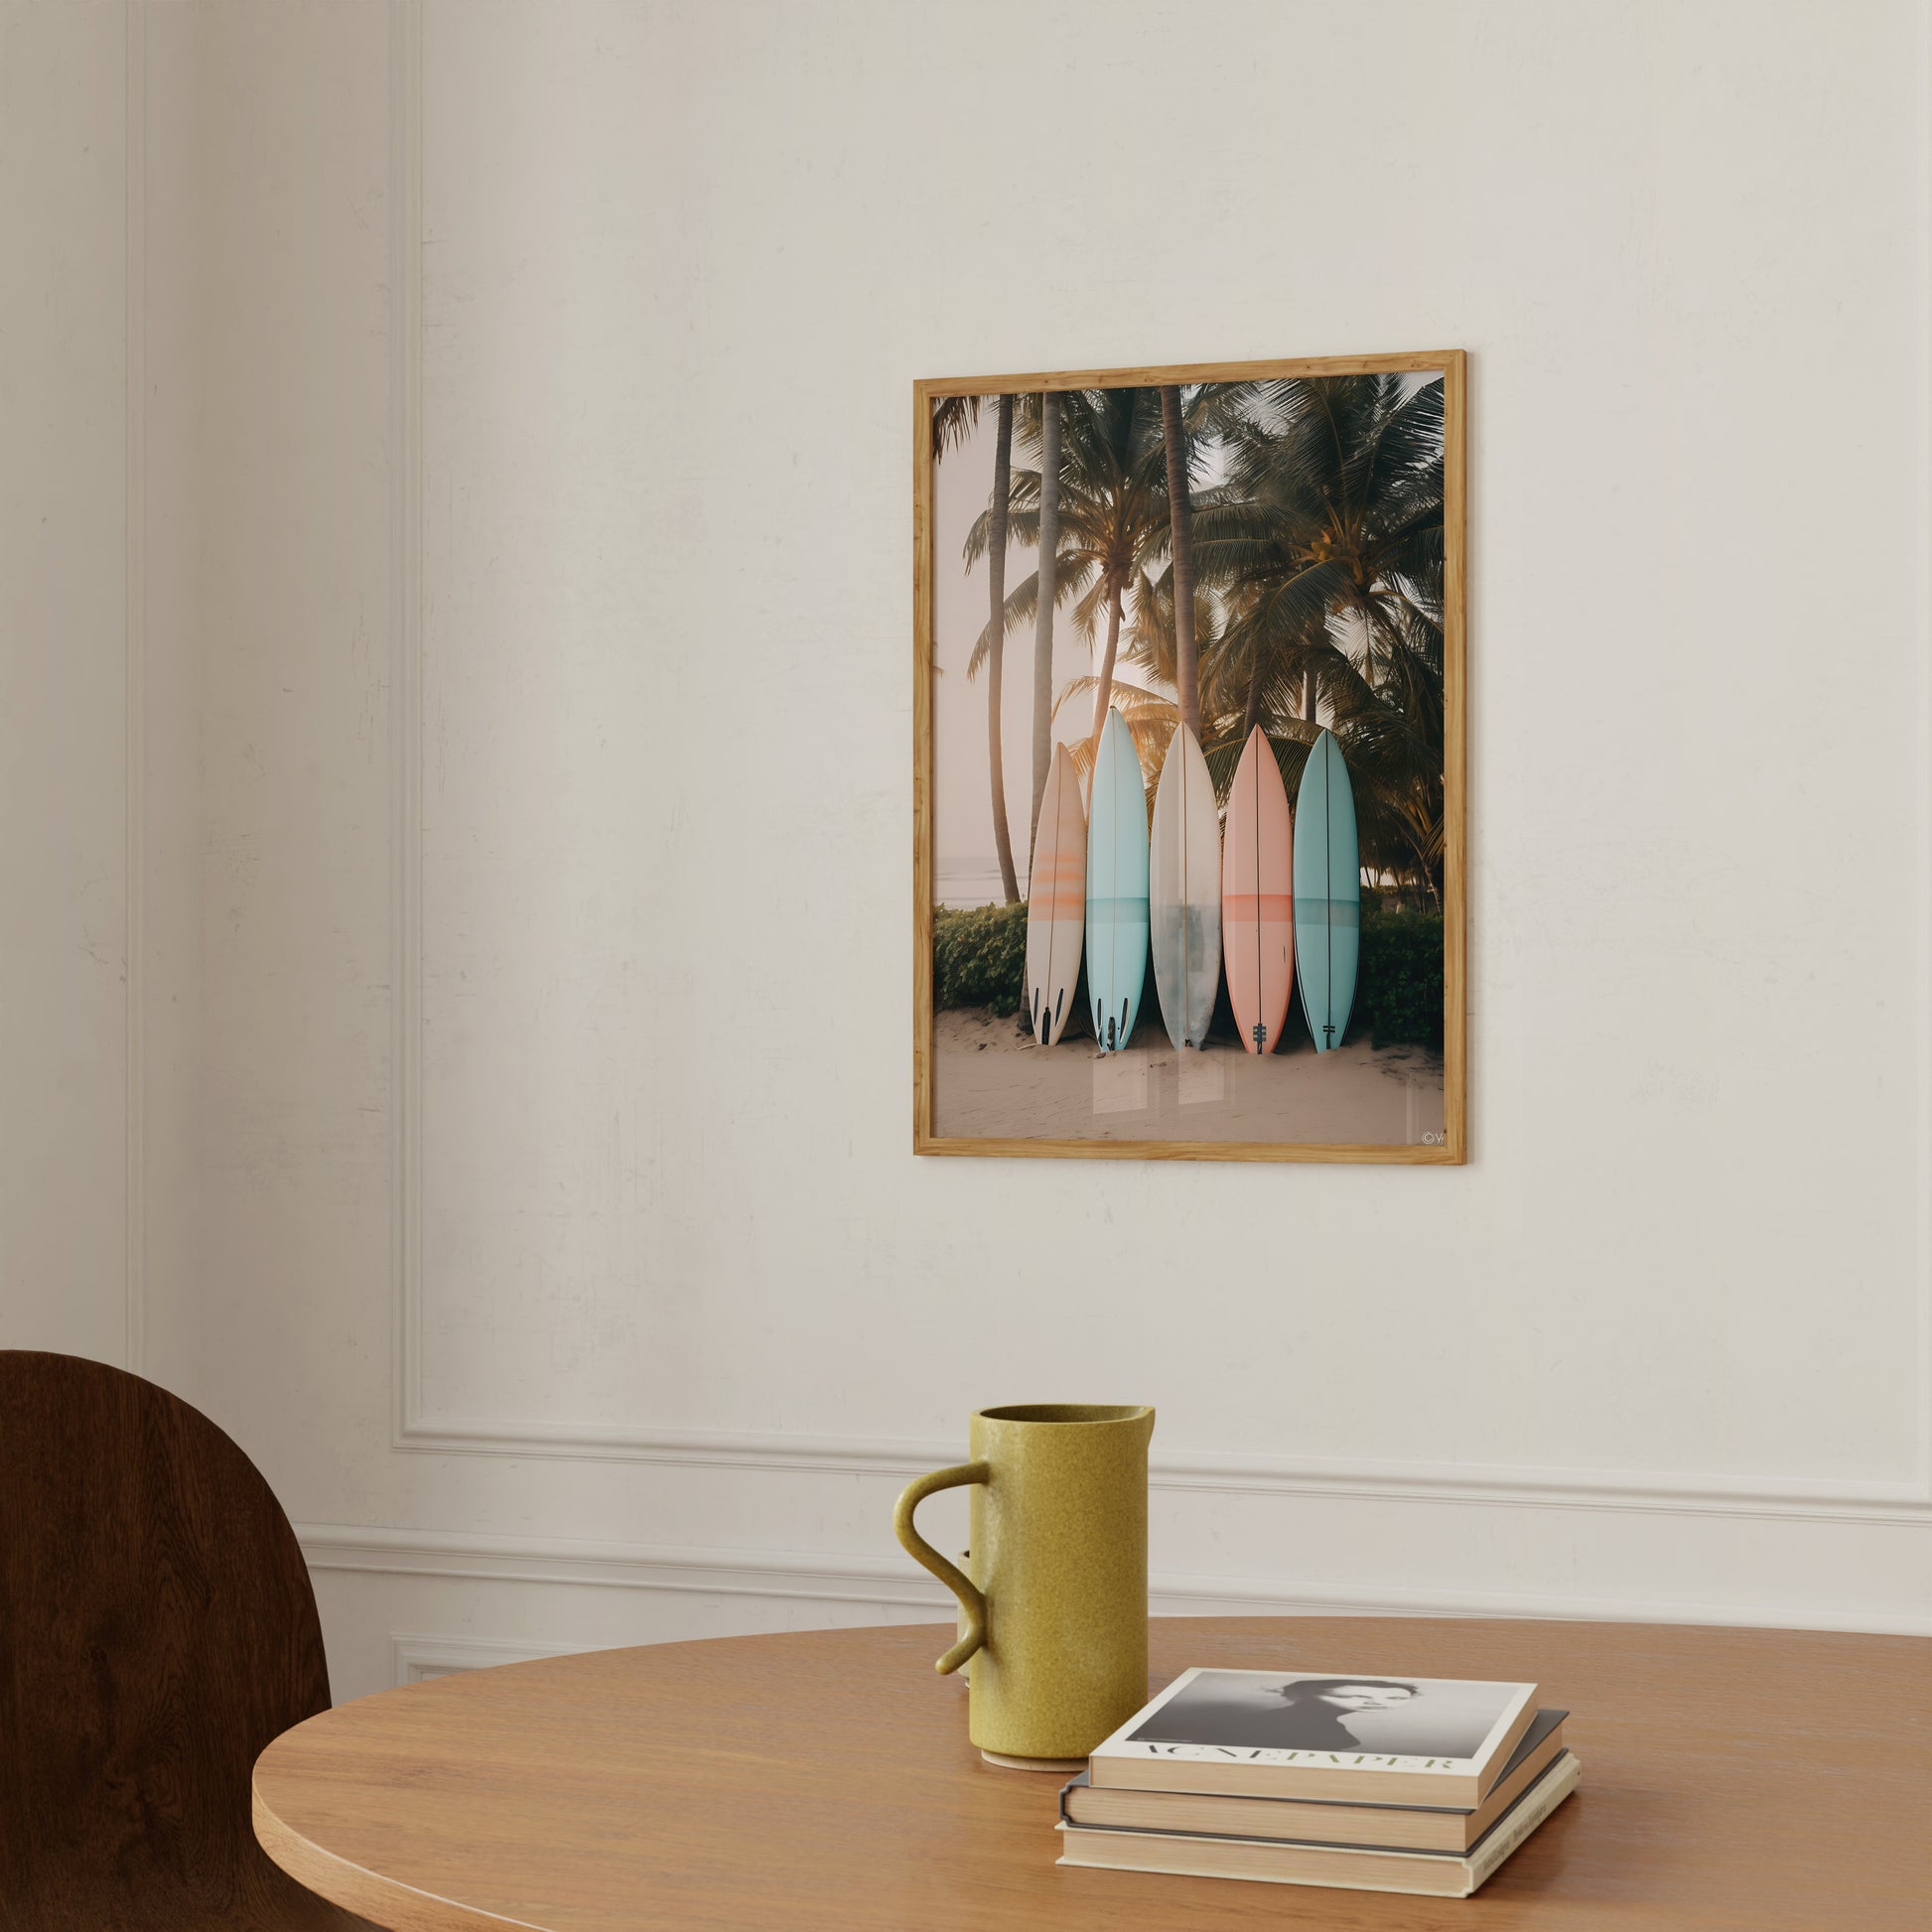 A picture of surfboards against palm trees on a wall above a table with a mug and books.